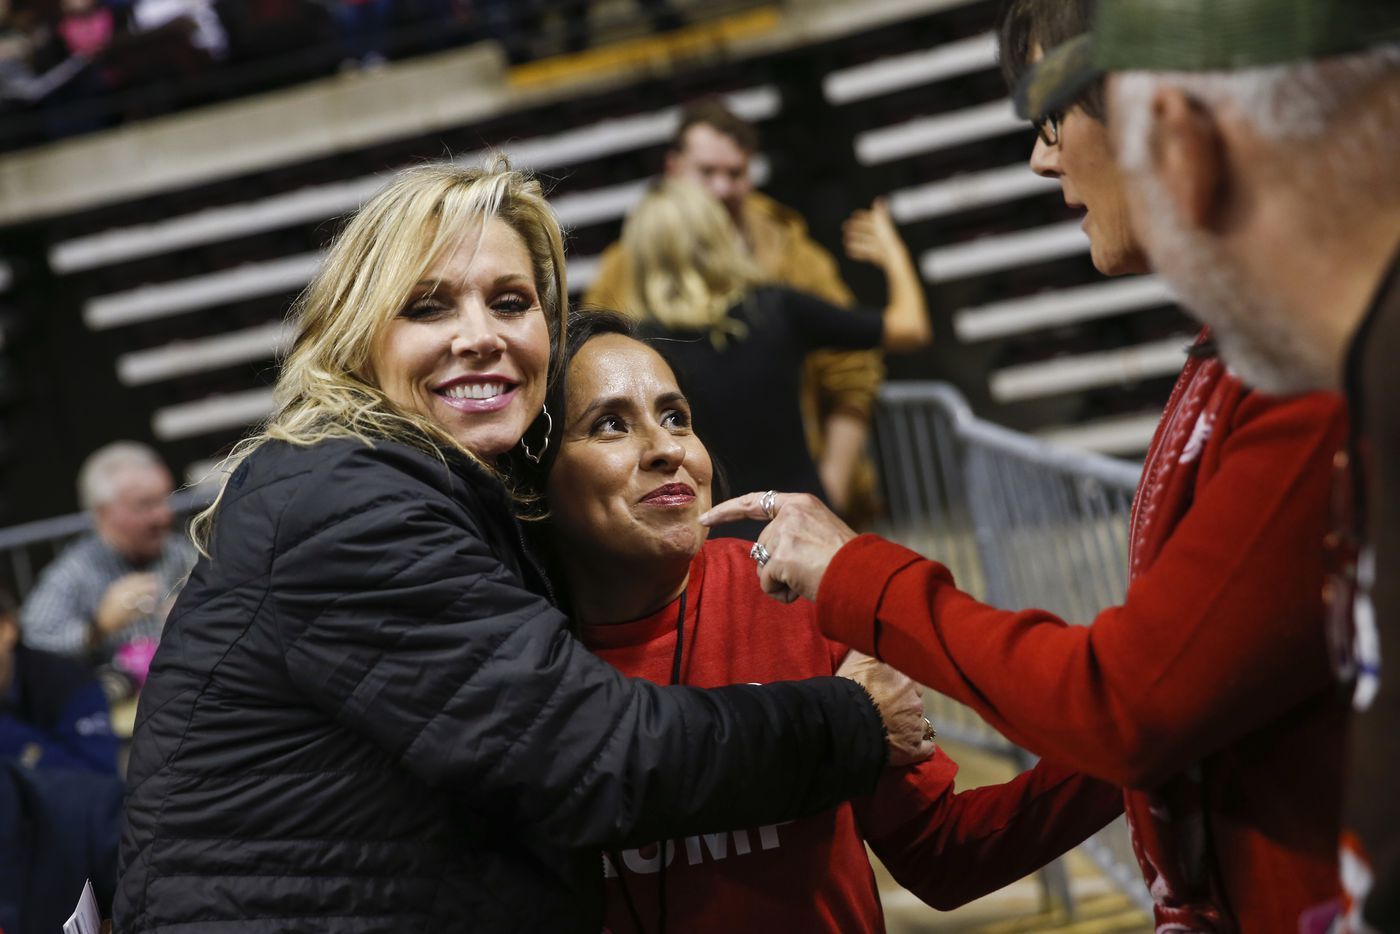 Teri Netterville (left) of KEEL 710 AM radio embraces Martha Doss, who gave an interview to the station during a rally to reelect President Donald Trump in Bossier City, La., on Nov. 14, 2019.